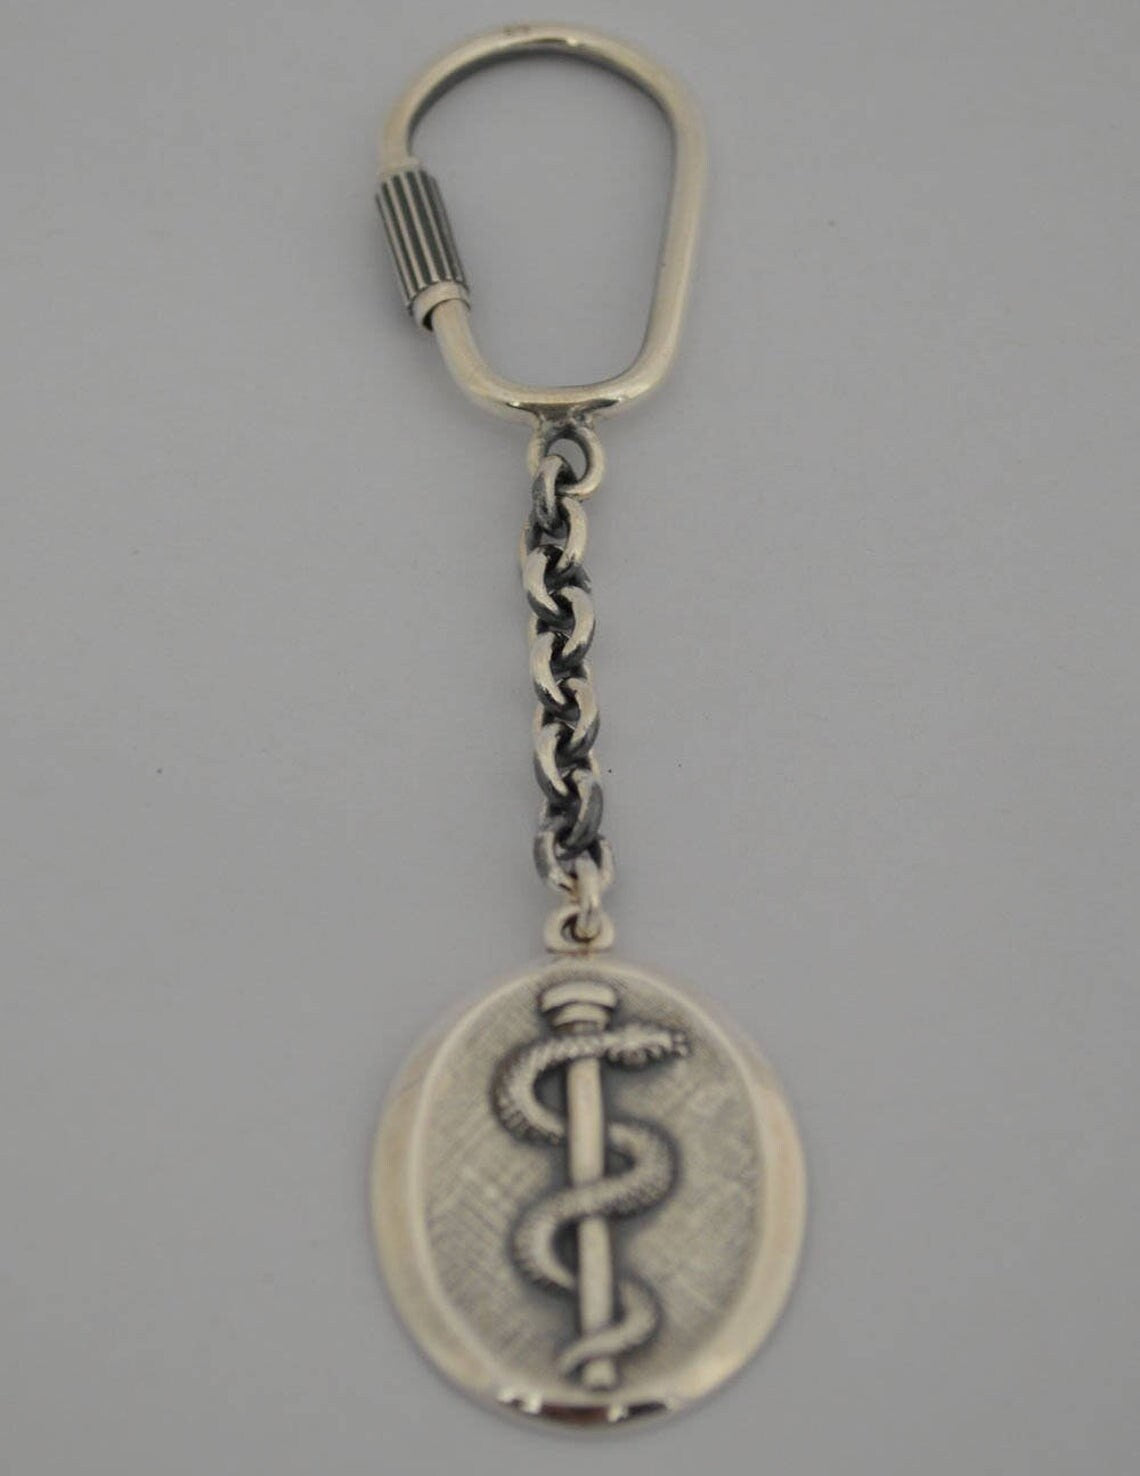 Rod - Sacred Symbol of Asclepius -  Ancient Greek God of Medicine and Healing - DNA Helix - Keychain - 925 Sterling Silver